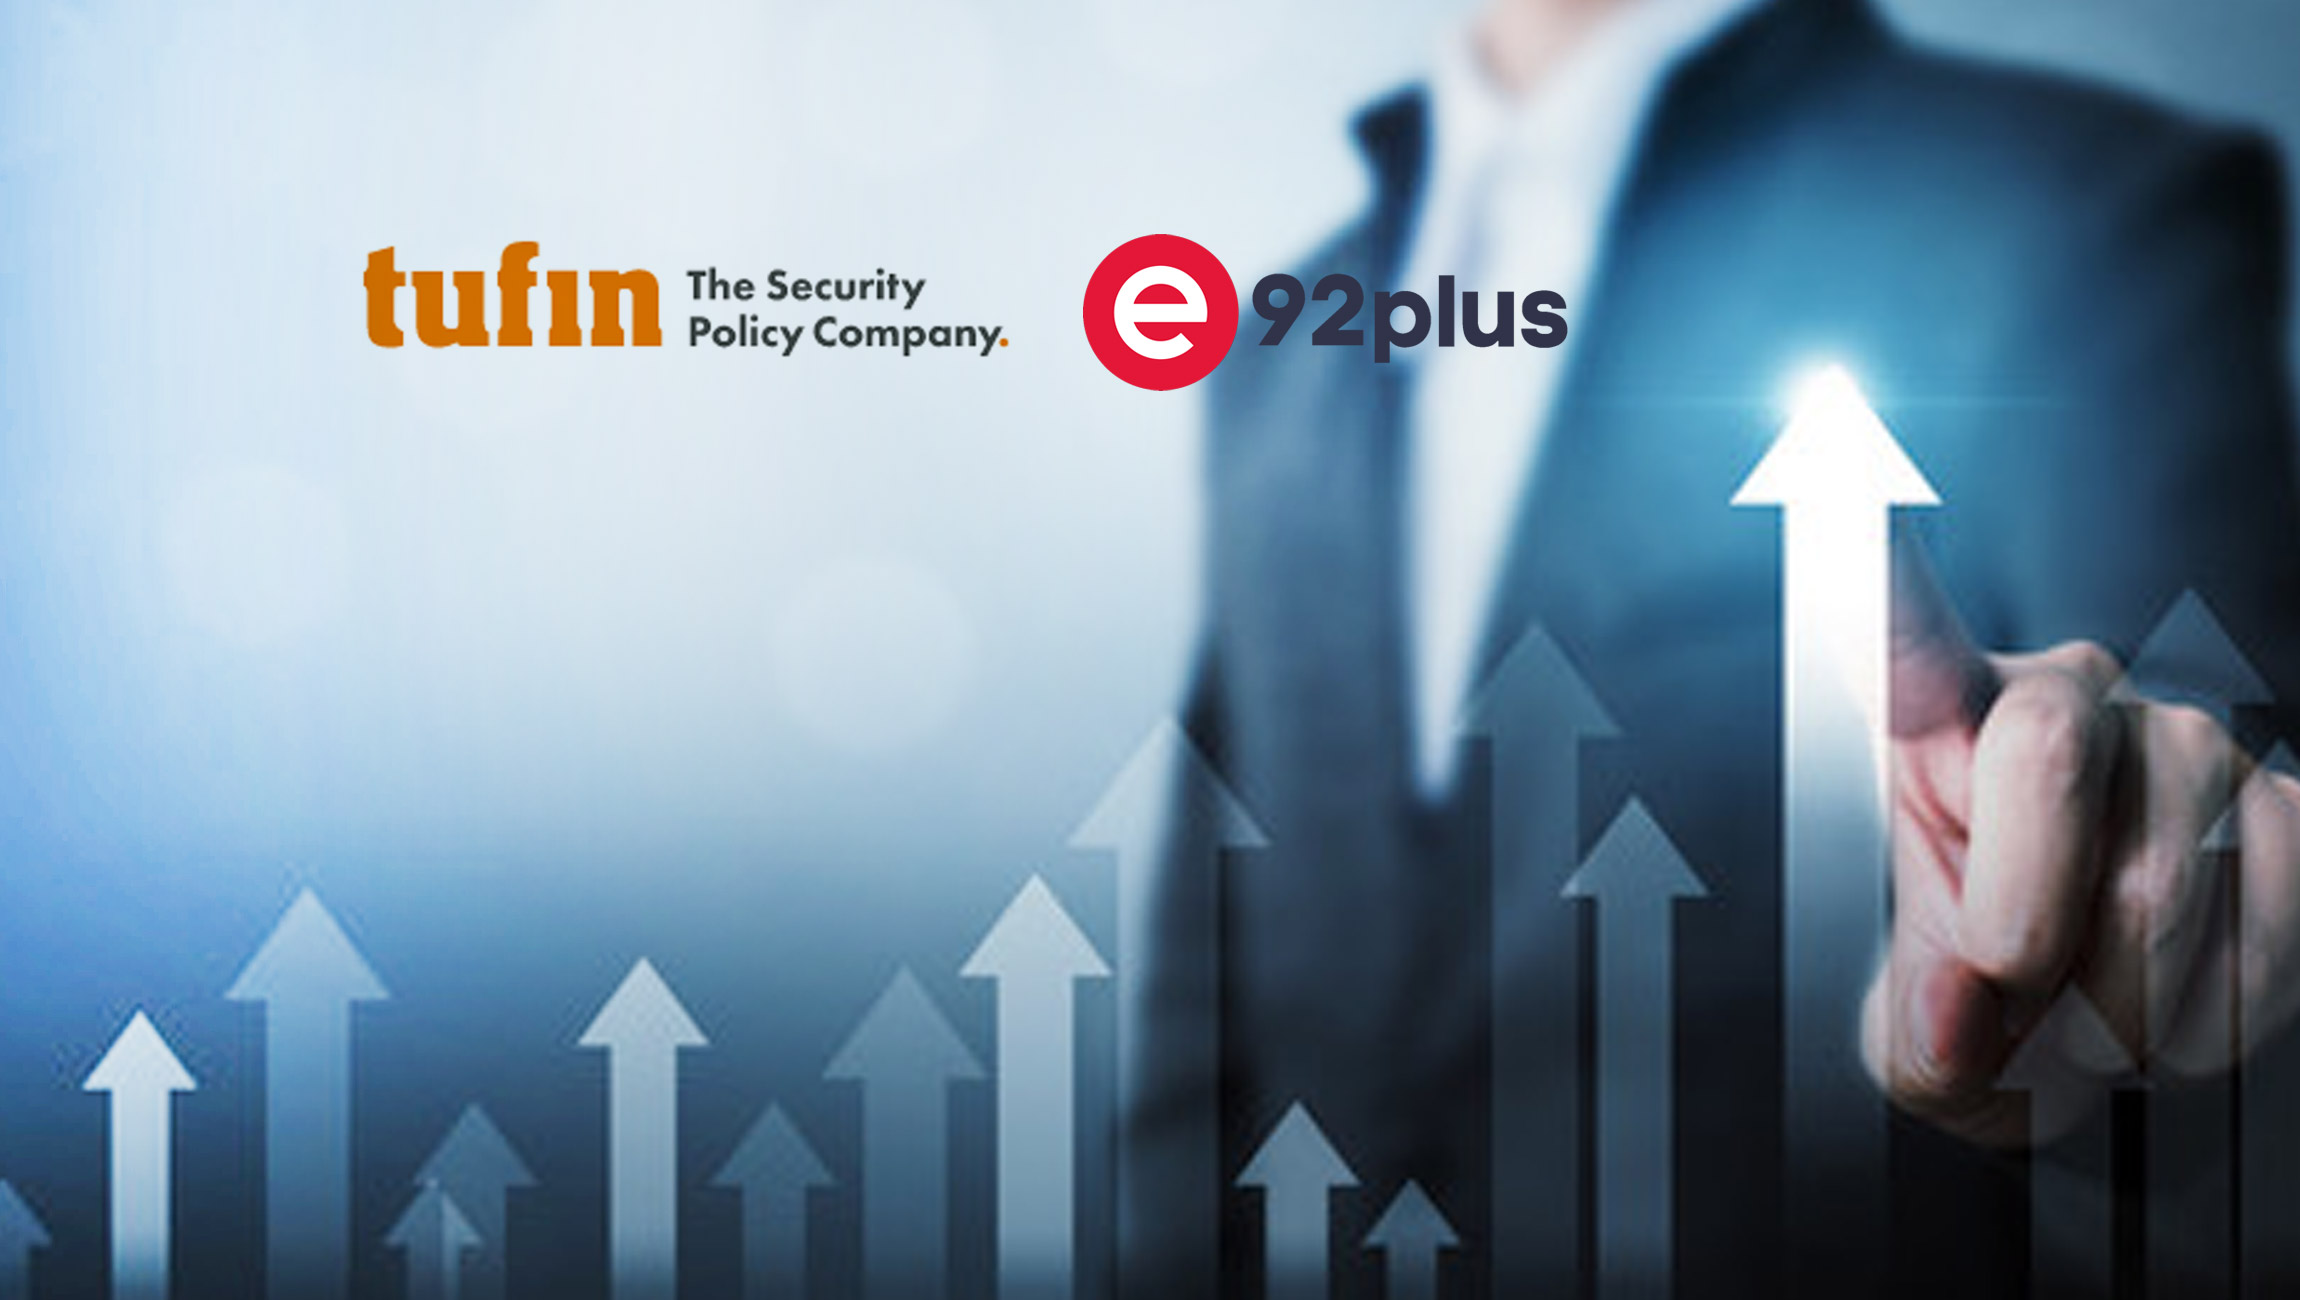 Tufin Appoints e92plus as a UK Distributor to Support Channel Growth